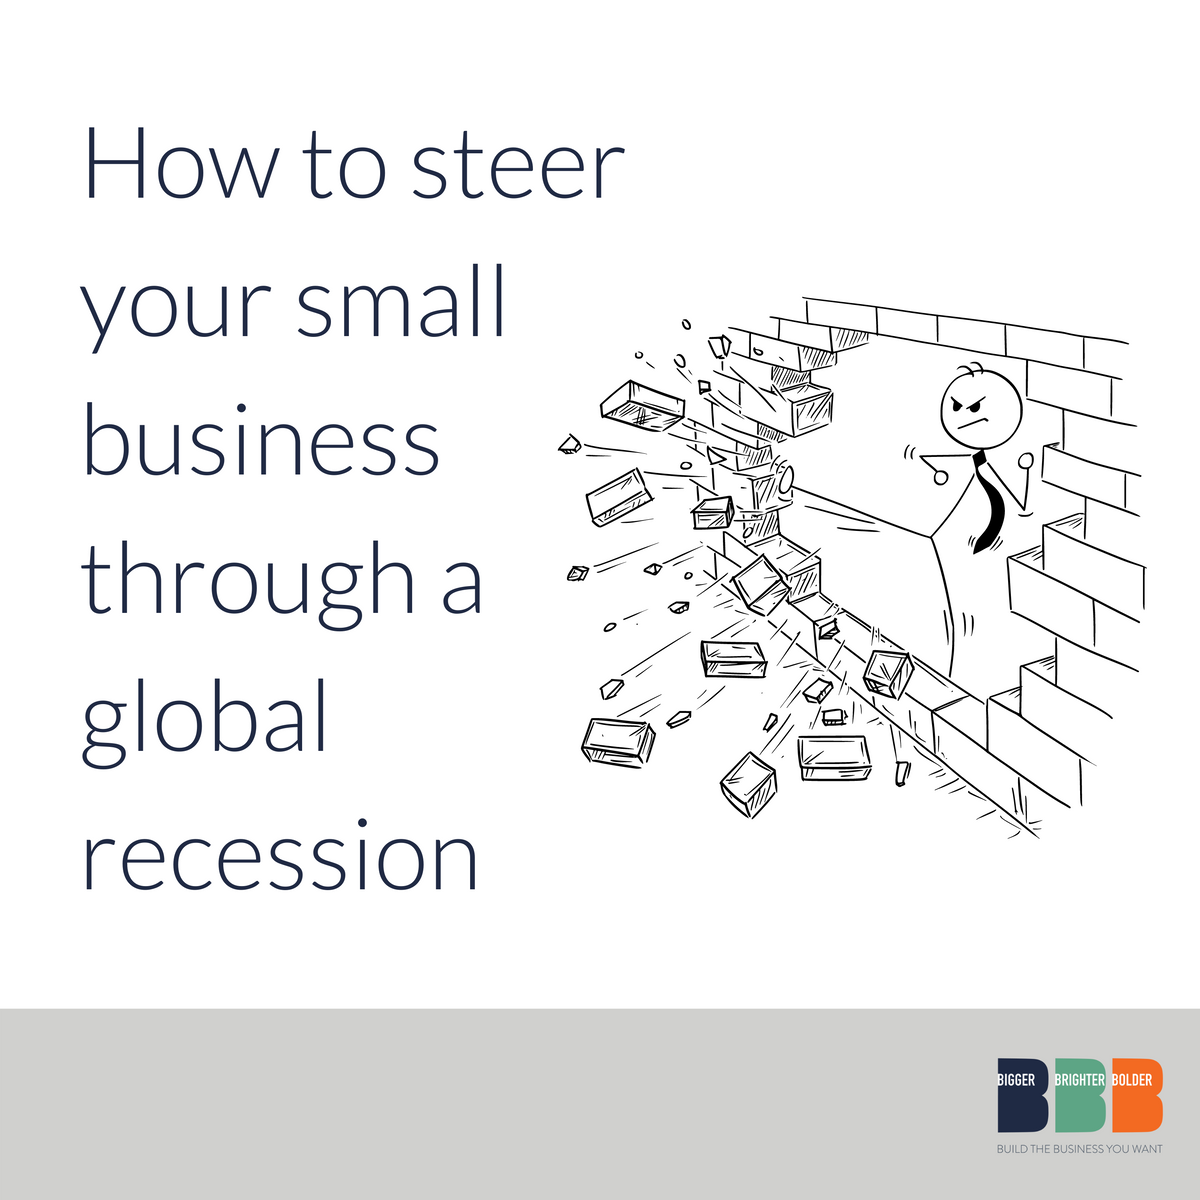 How to Steer Your Small Business Through a Global Recession